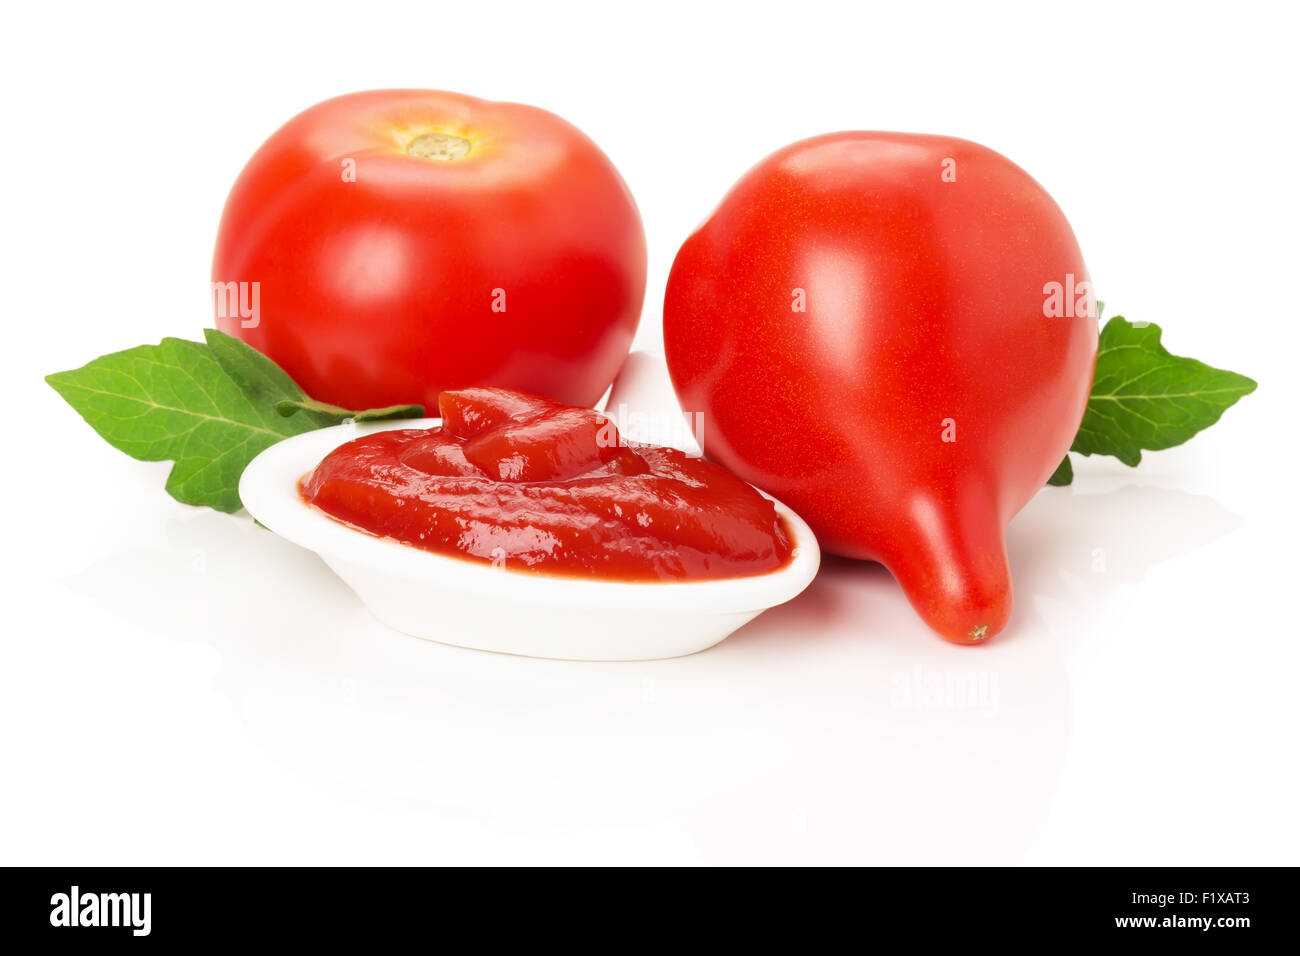 Bowl with tomato sauce and juicy red tomatoes isolated on the white background. Stock Photo